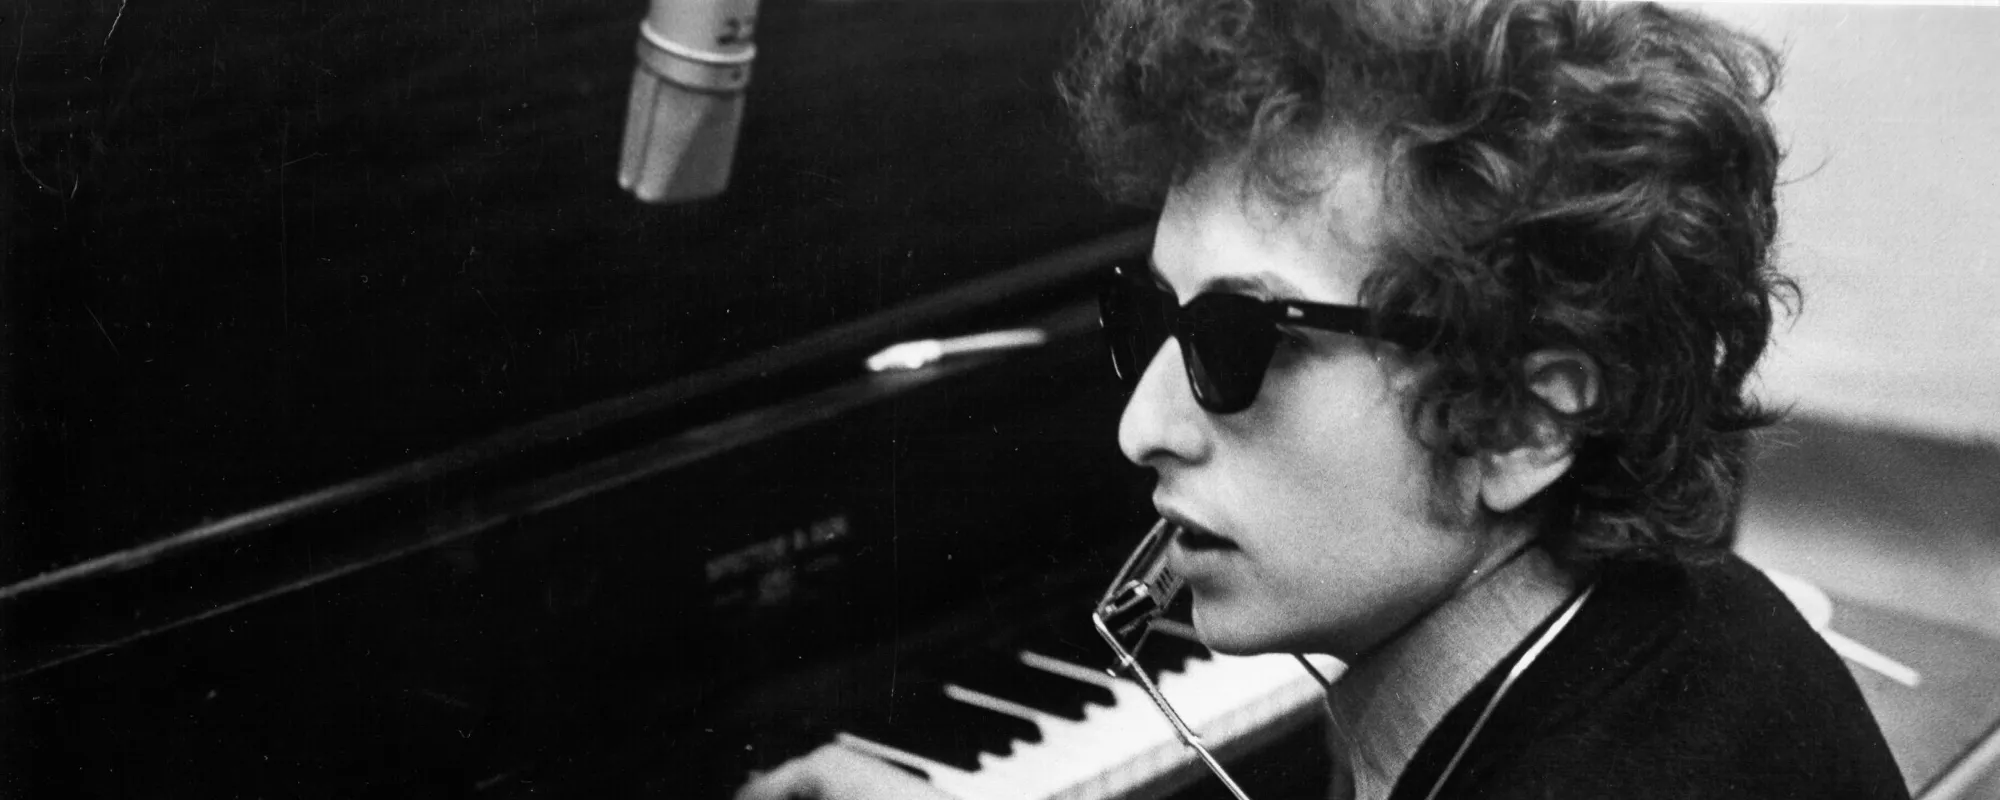 The Story Behind “Don’t Think Twice, It’s All Right” by Bob Dylan and Why It’s Not a Love Song